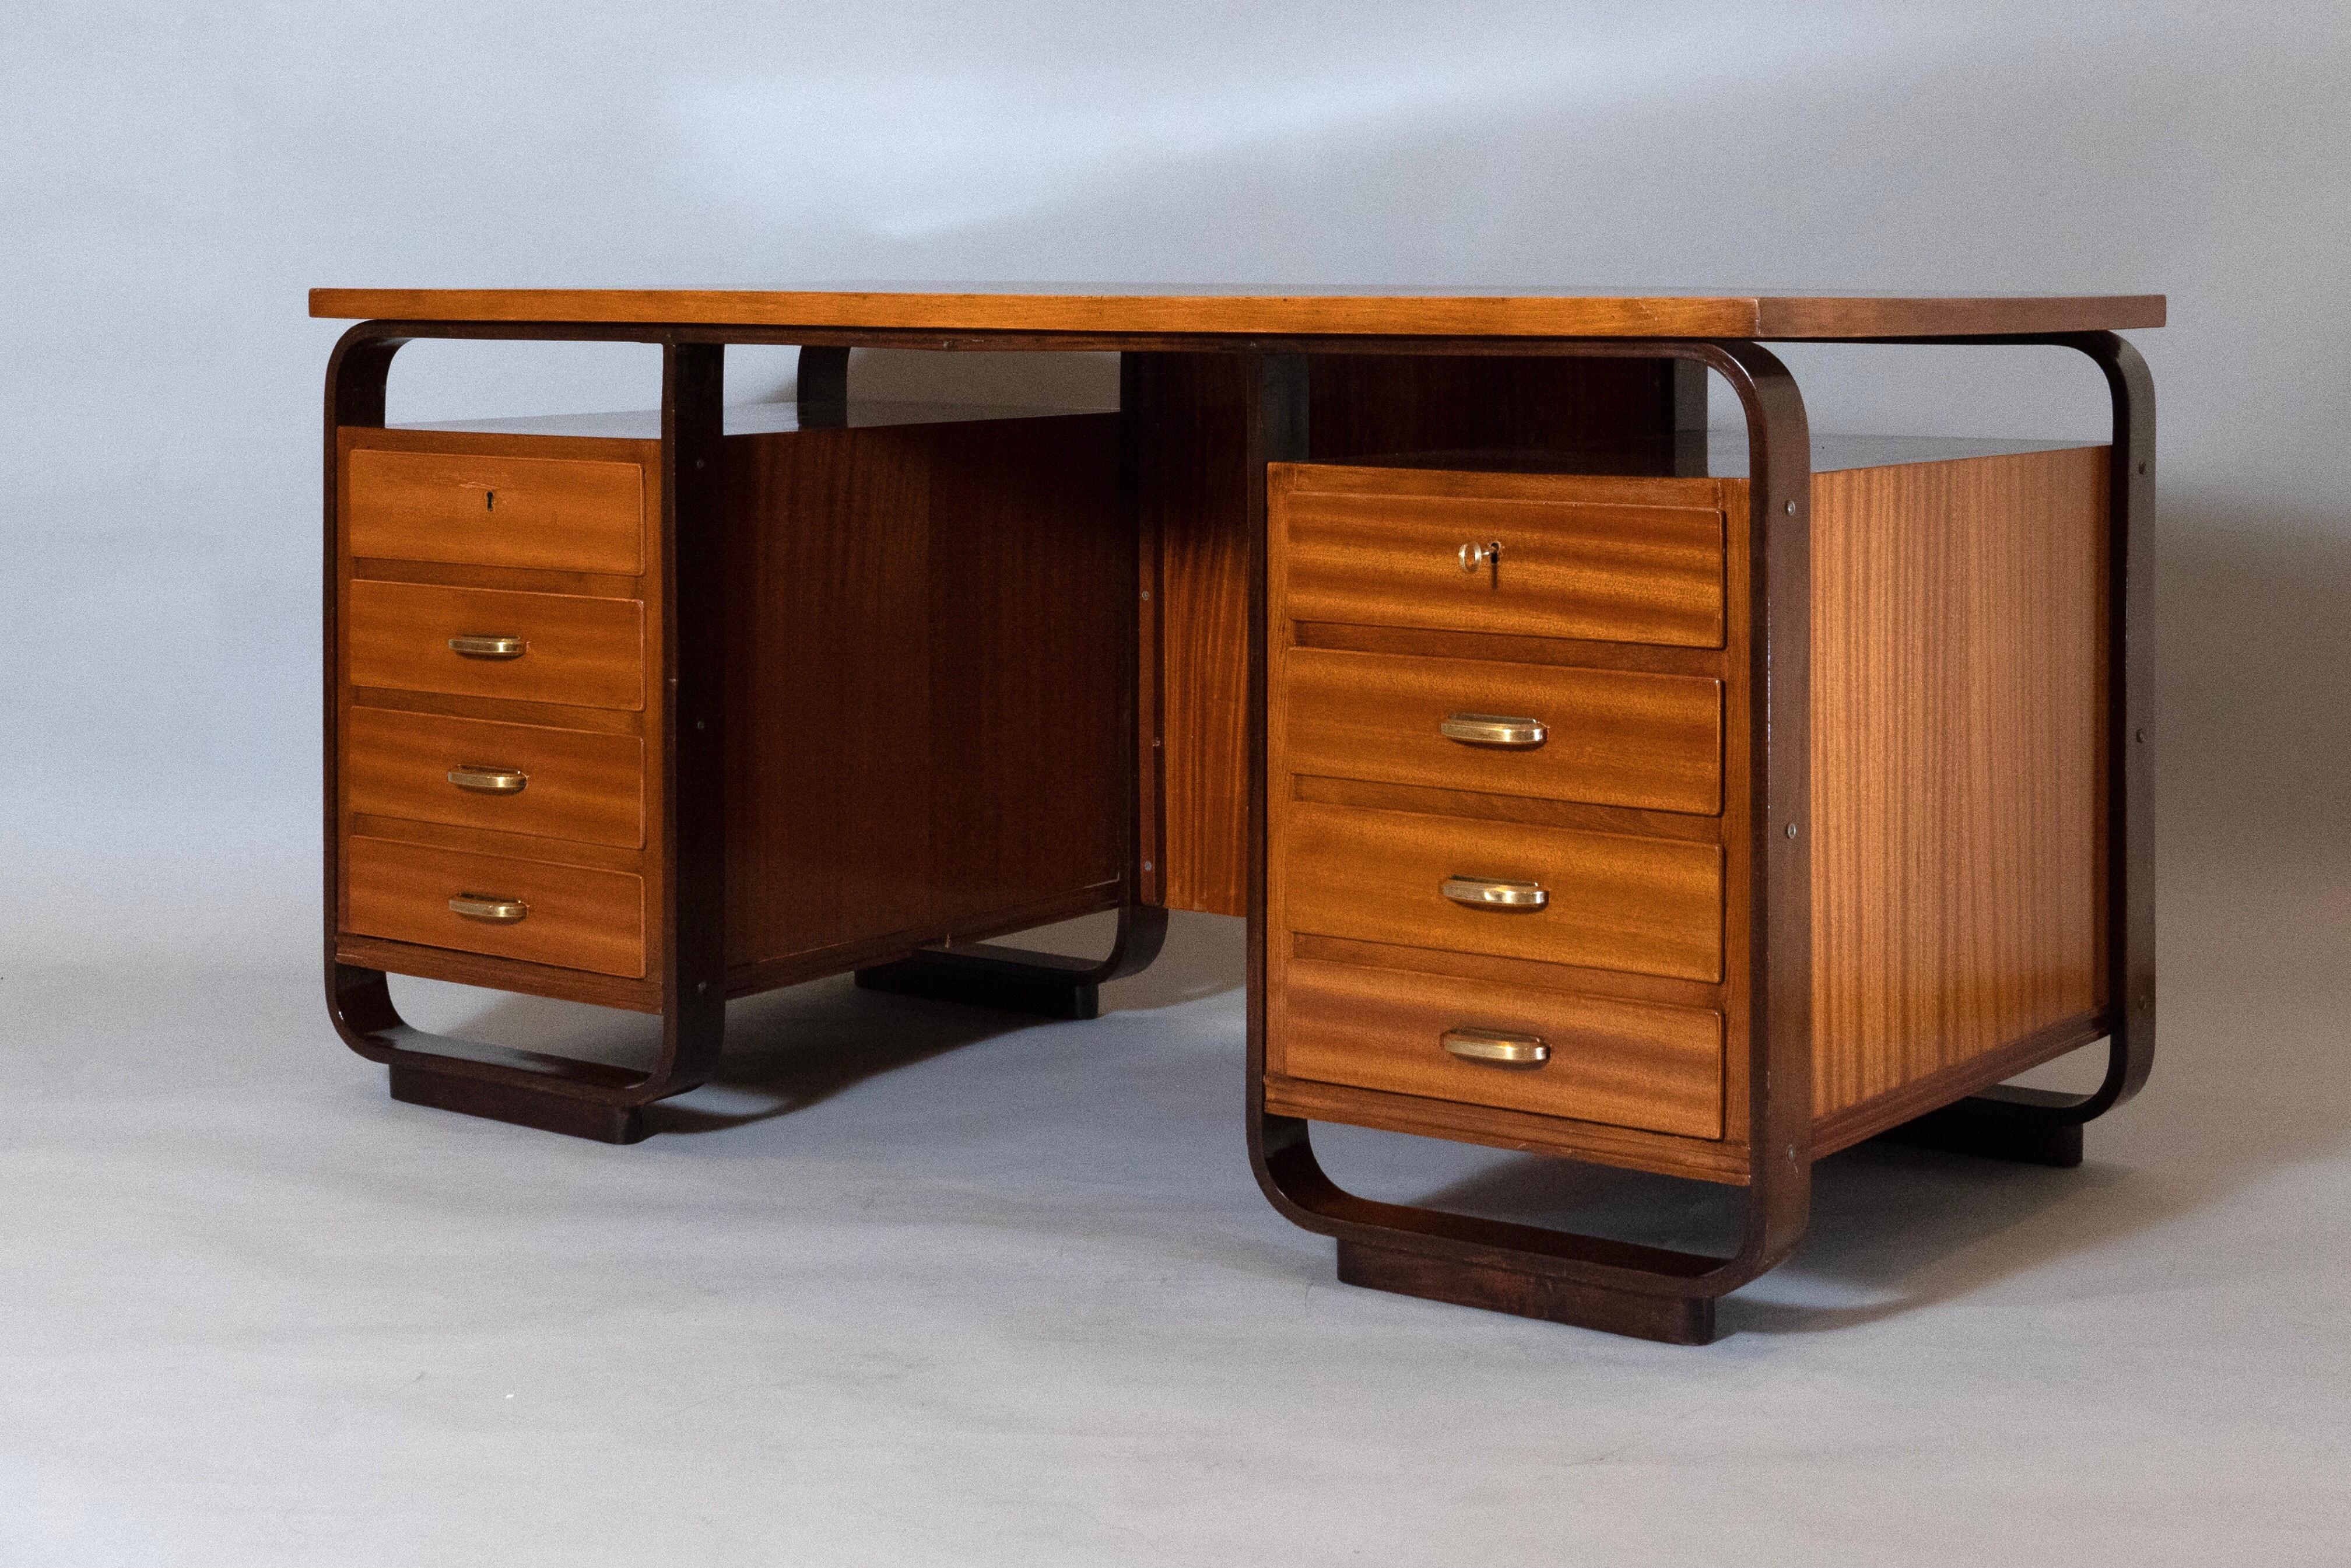 Giuseppe Pagano: Eight Drawer Desk in Fruitwood and Brass, Italy 1940 For Sale 5